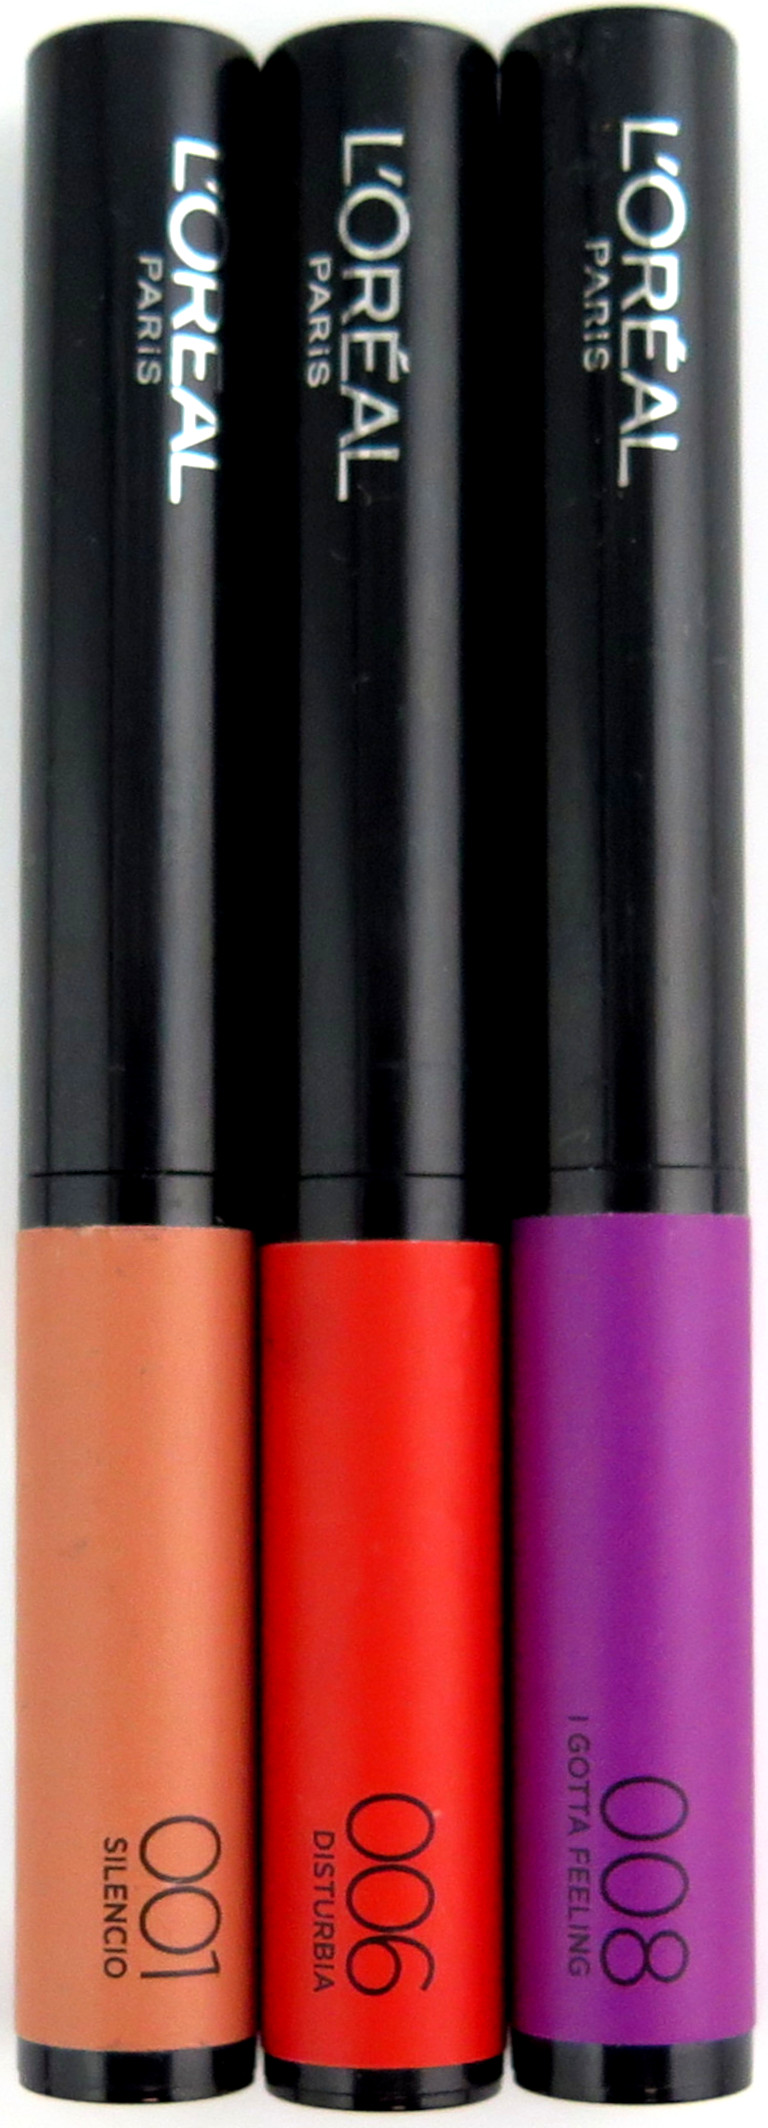 L'Oreal Infallible Matte Max Lipstick - Assorted